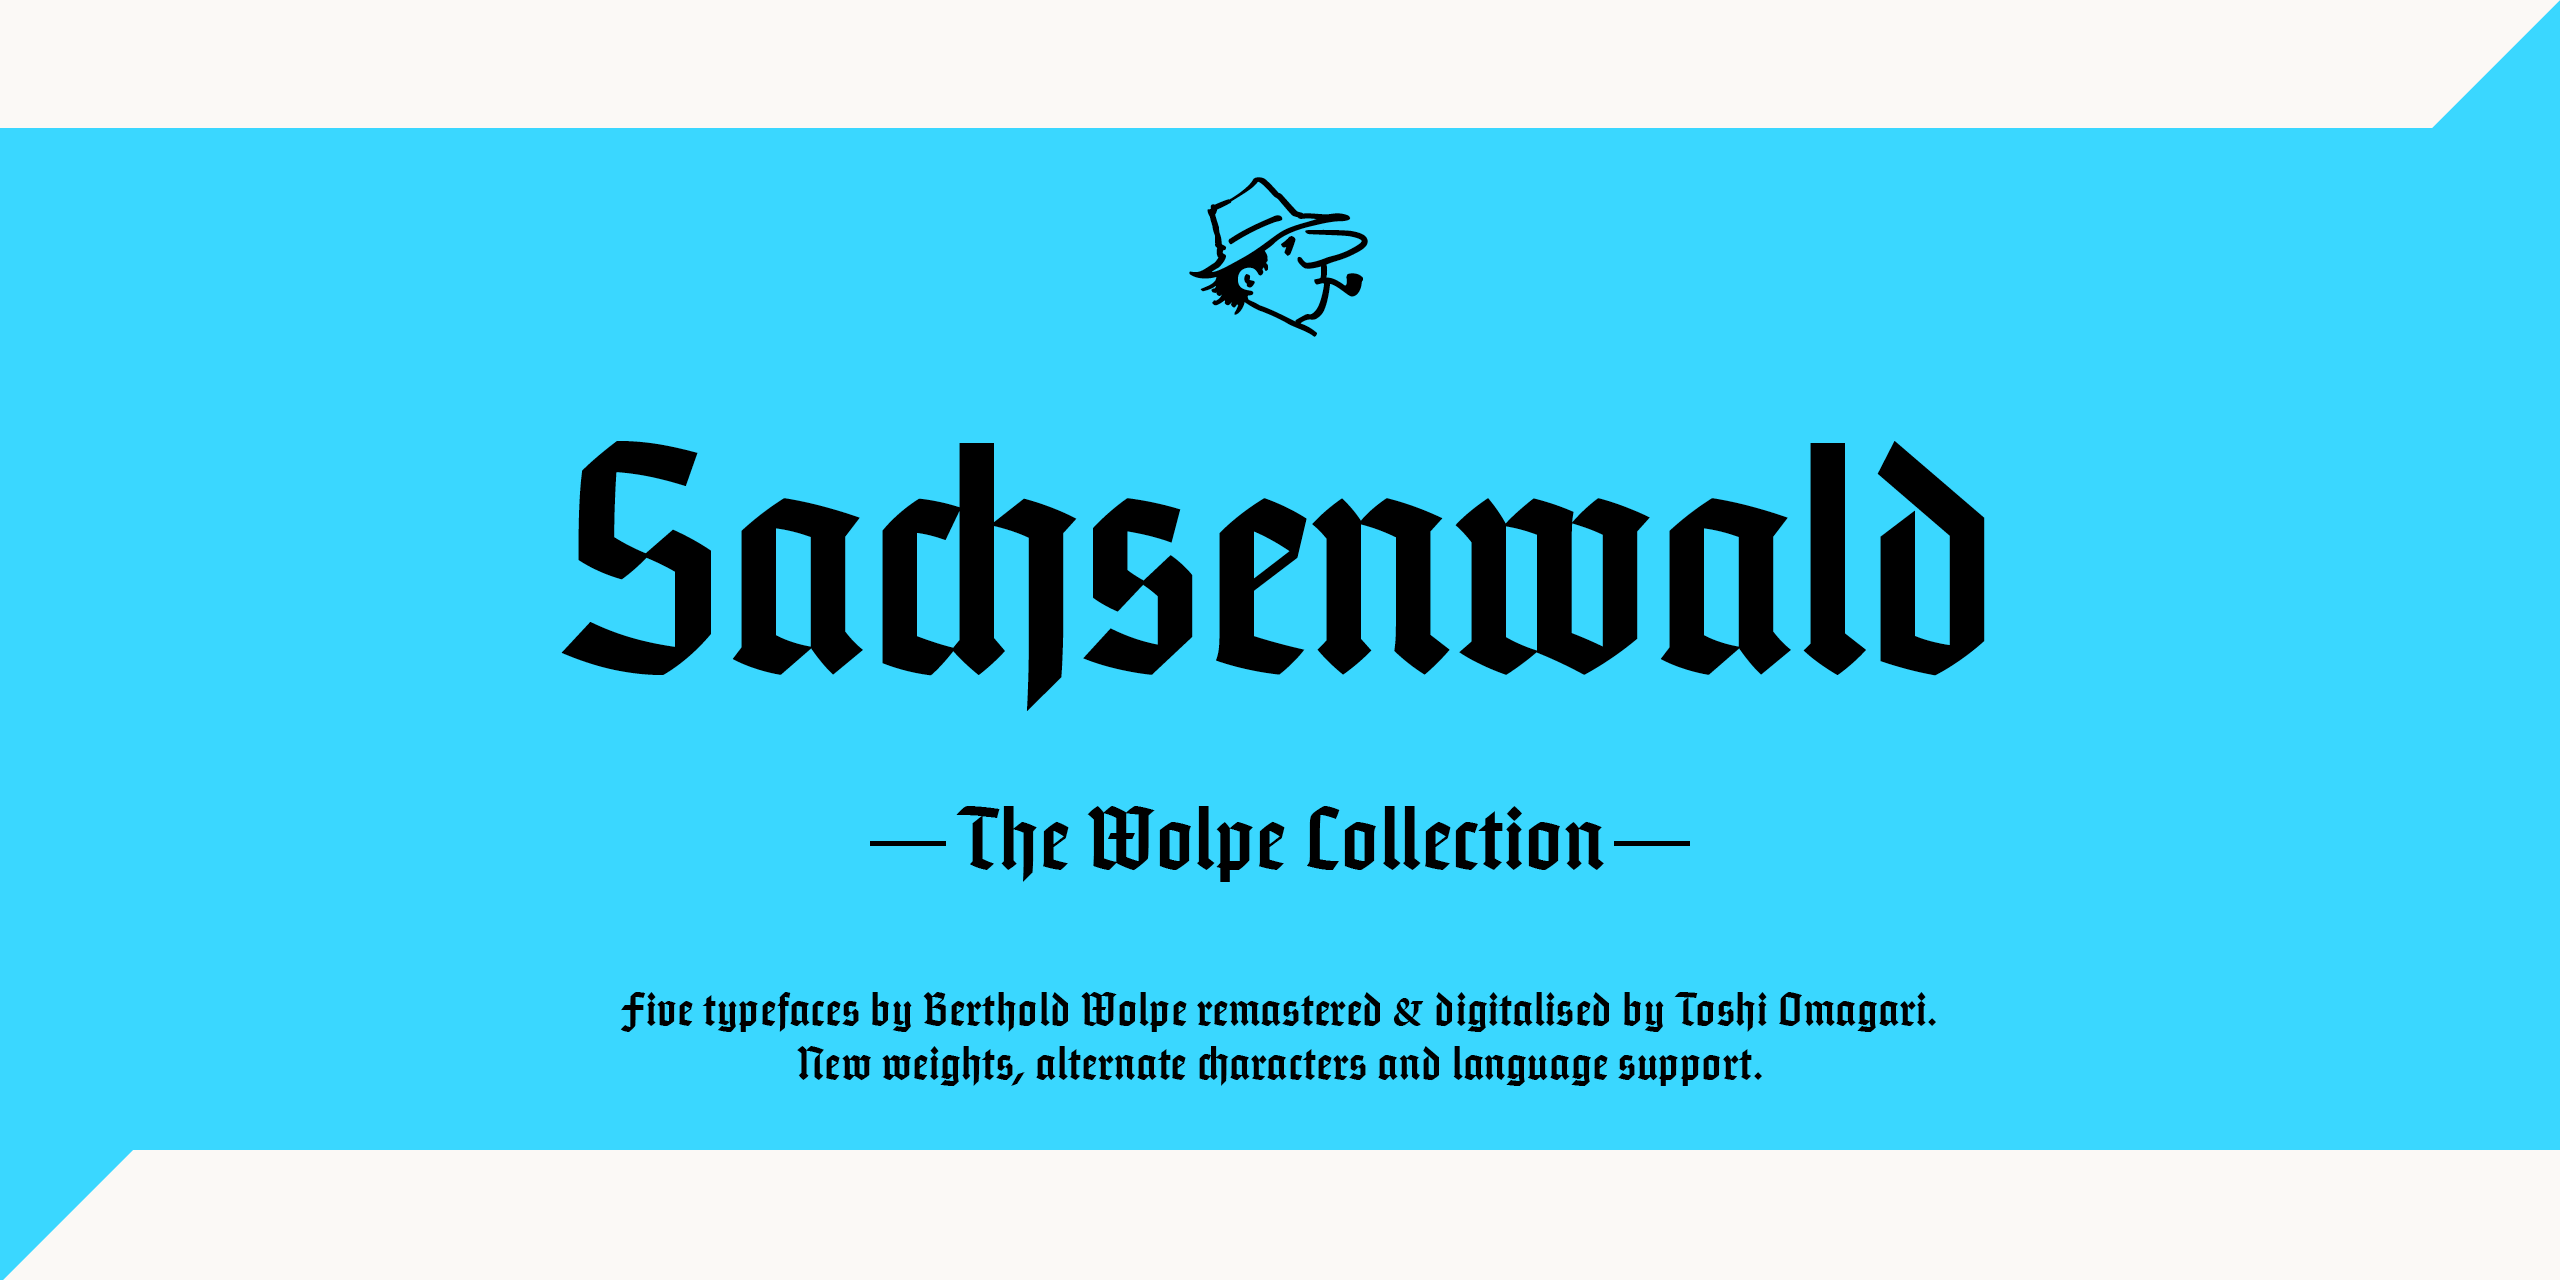 The Wolpe Collection – Sachsenwald